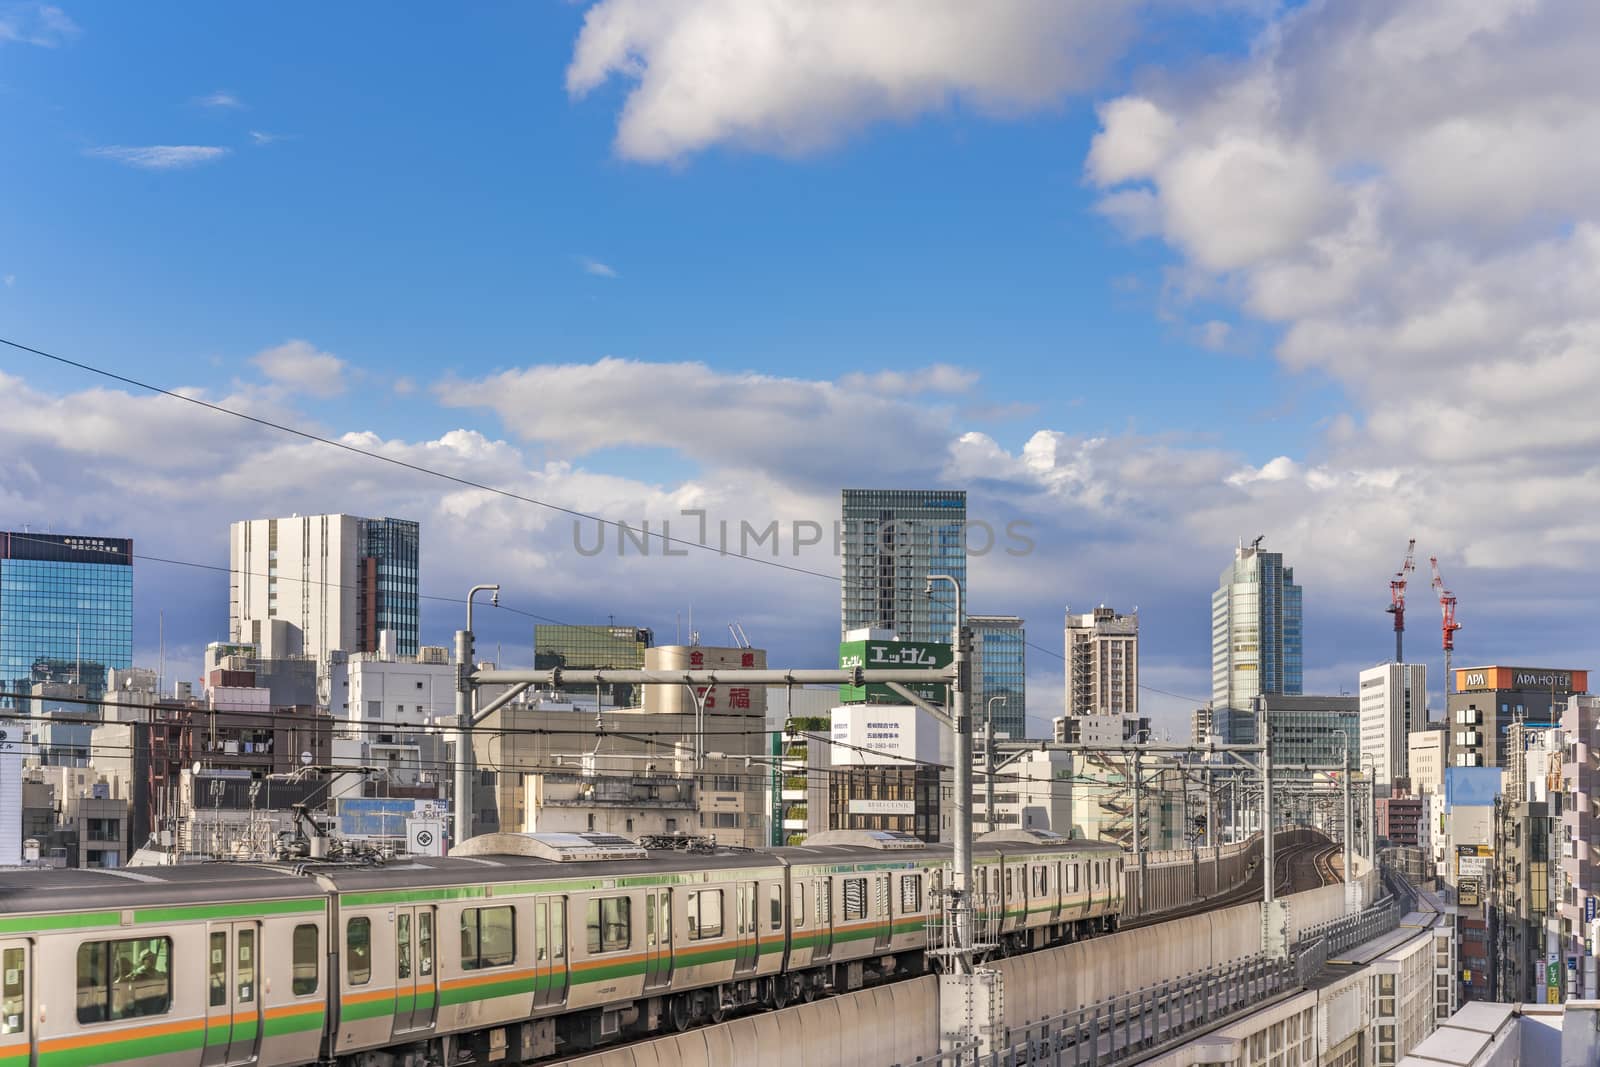 kanda station where the trains of the yamanote line pass between the top of the buildings of the district of Chiyoda under the blue sky of Tokyo.